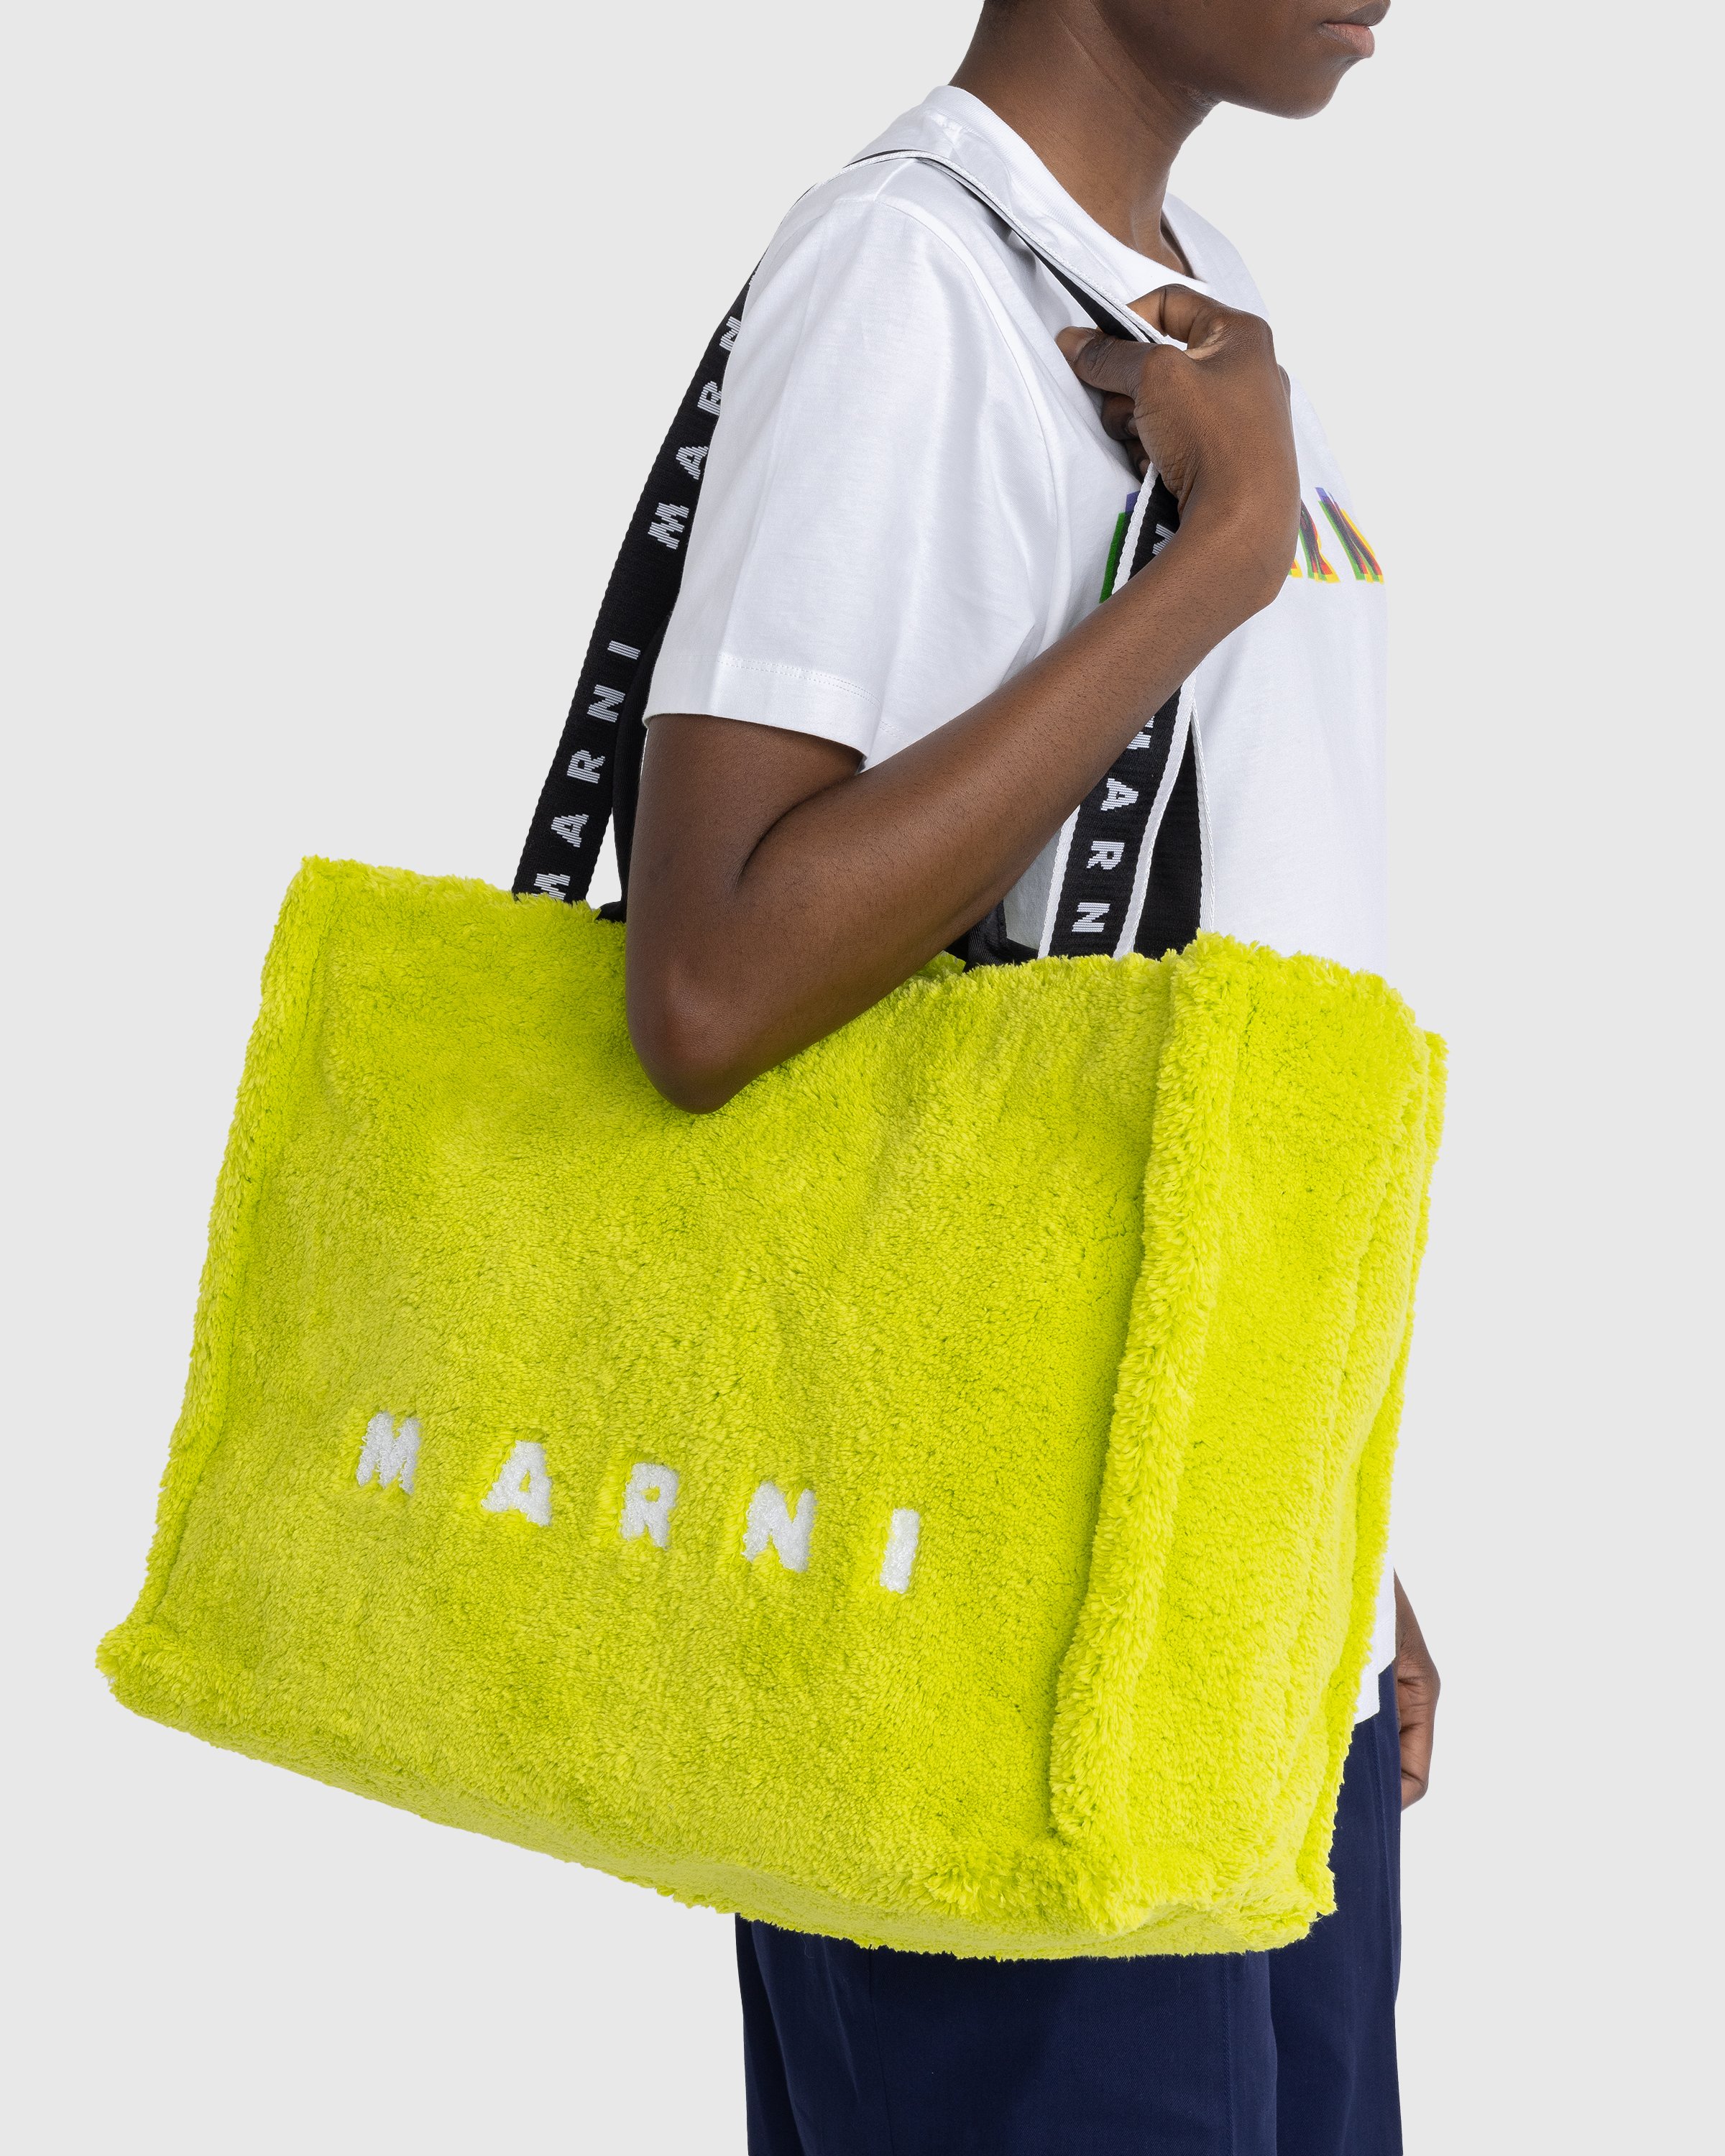 Marni - Terry Cloth Tote Bag Light Lime - Accessories - Green - Image 7